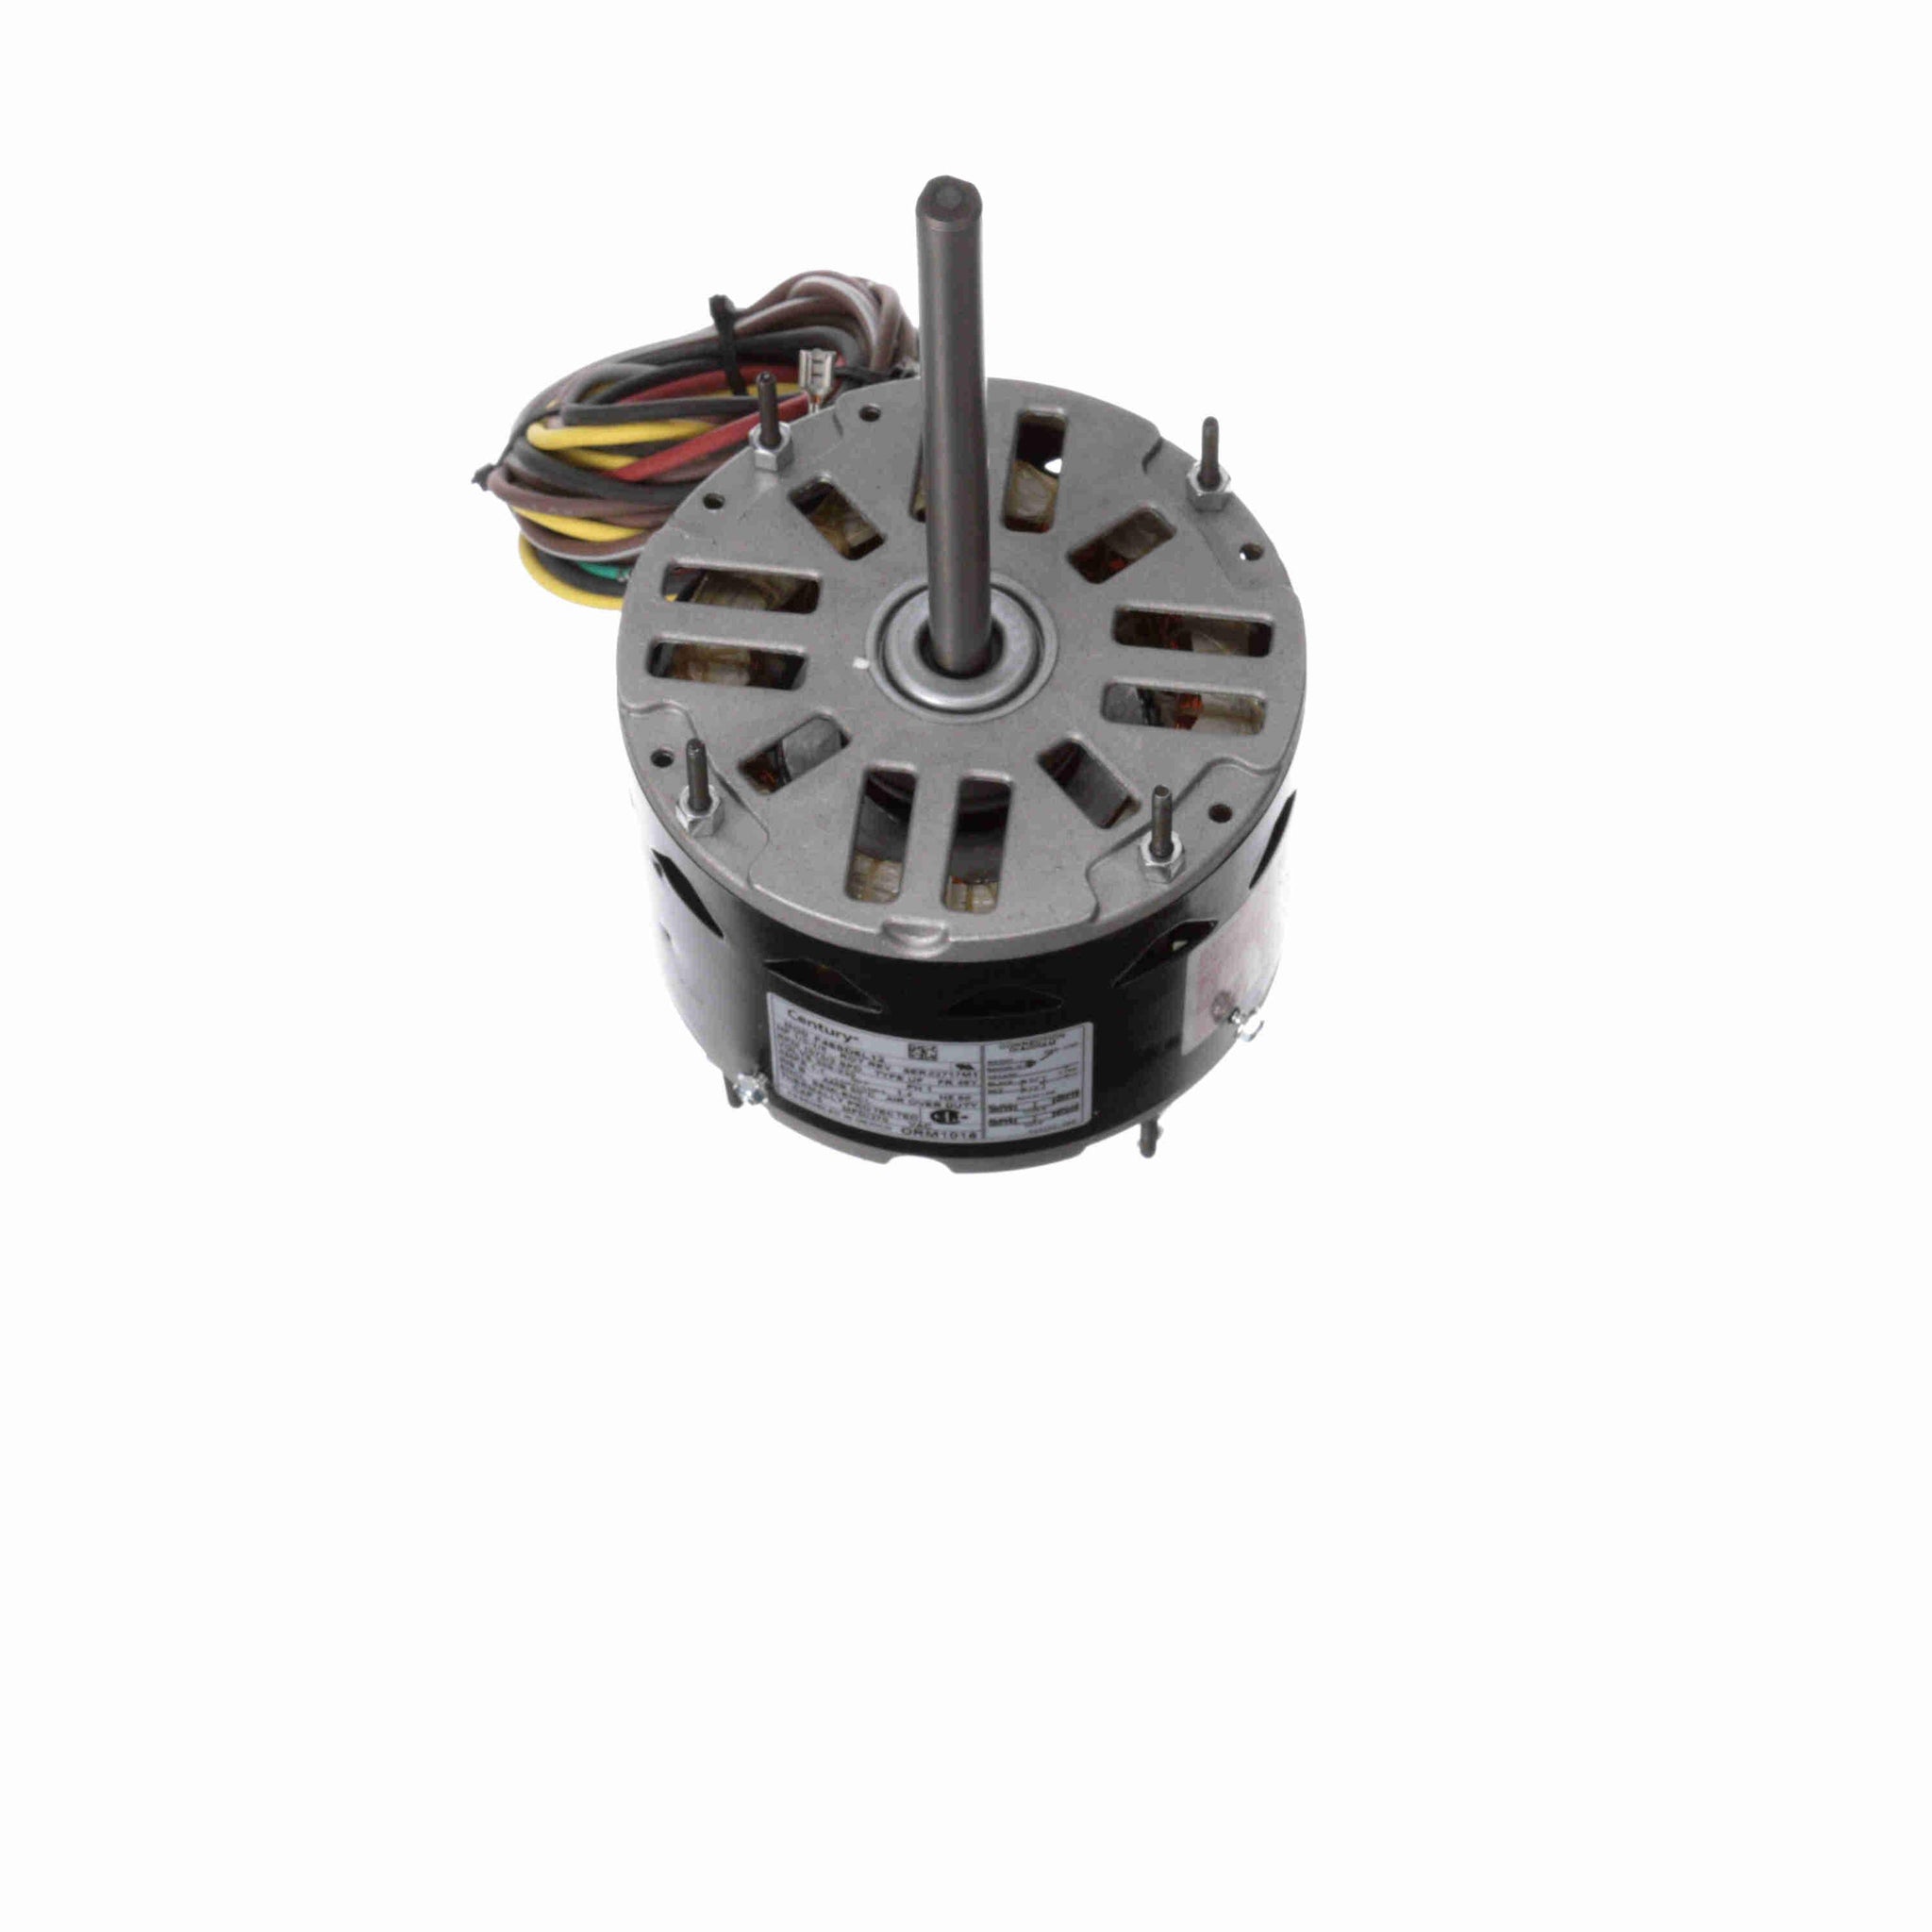 ORM1016 - 1/5-1/8 HP OEM Replacement Motor, 1075 RPM, 2 Speed, 208-230 Volts, 48 Frame, OAO - Hardware & Moreee